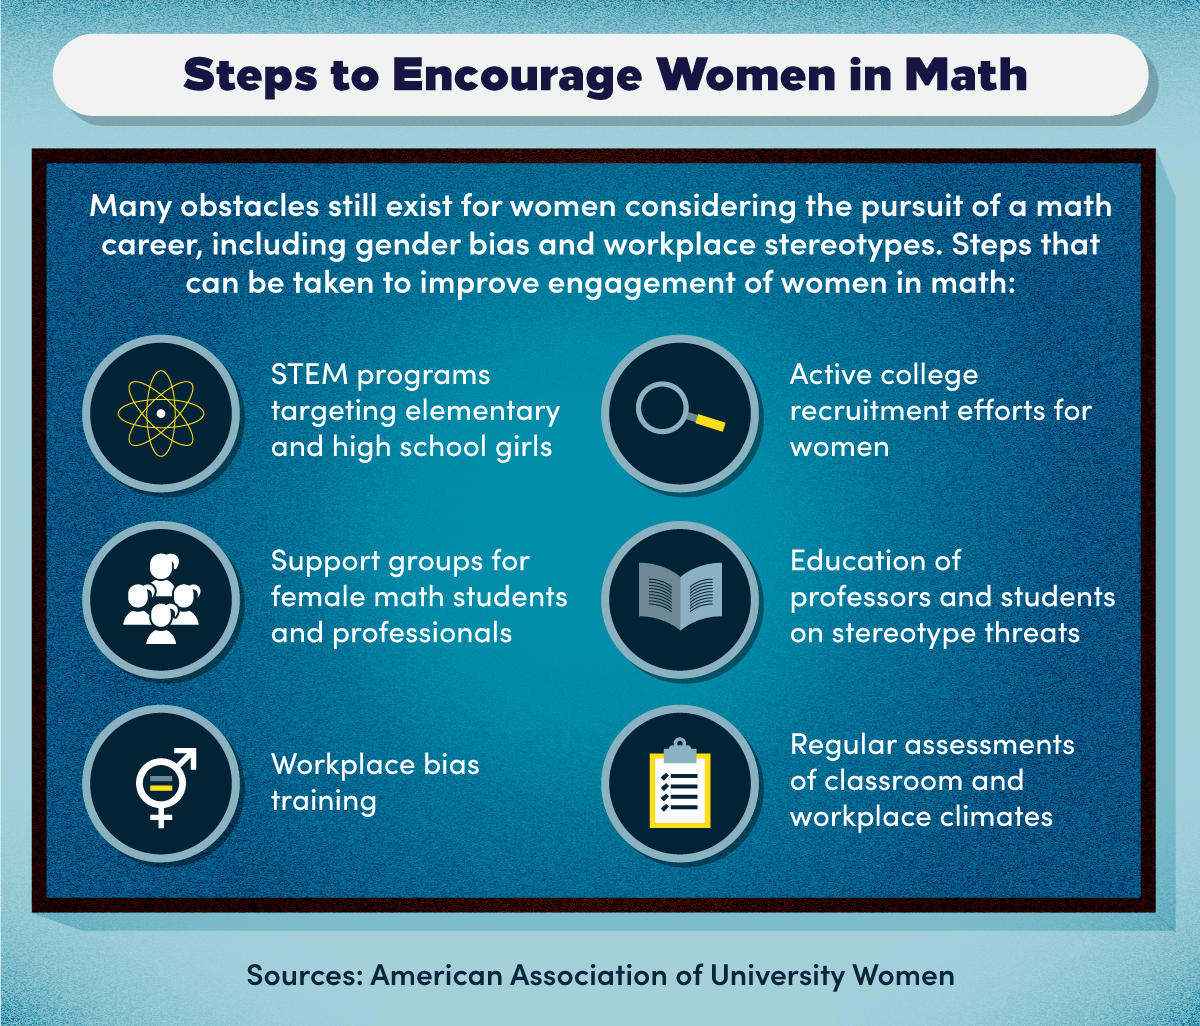 STEM programs, college recruitment efforts, support groups, and workplace bias training are positive steps for improving engagement of women in math. 